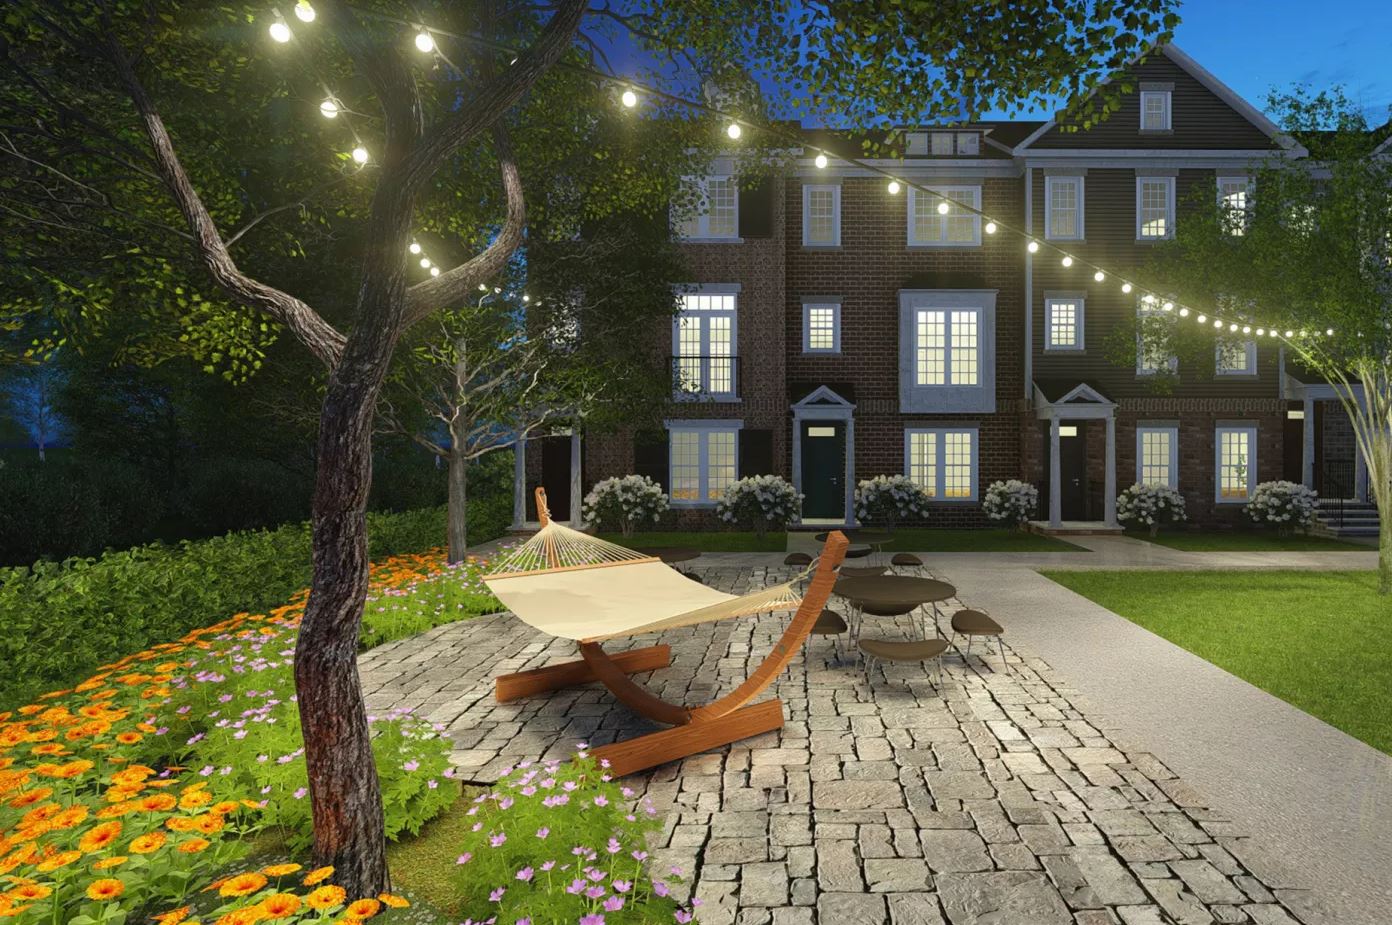 A rudimentry rendering of townhomes with a hammock and large patio.